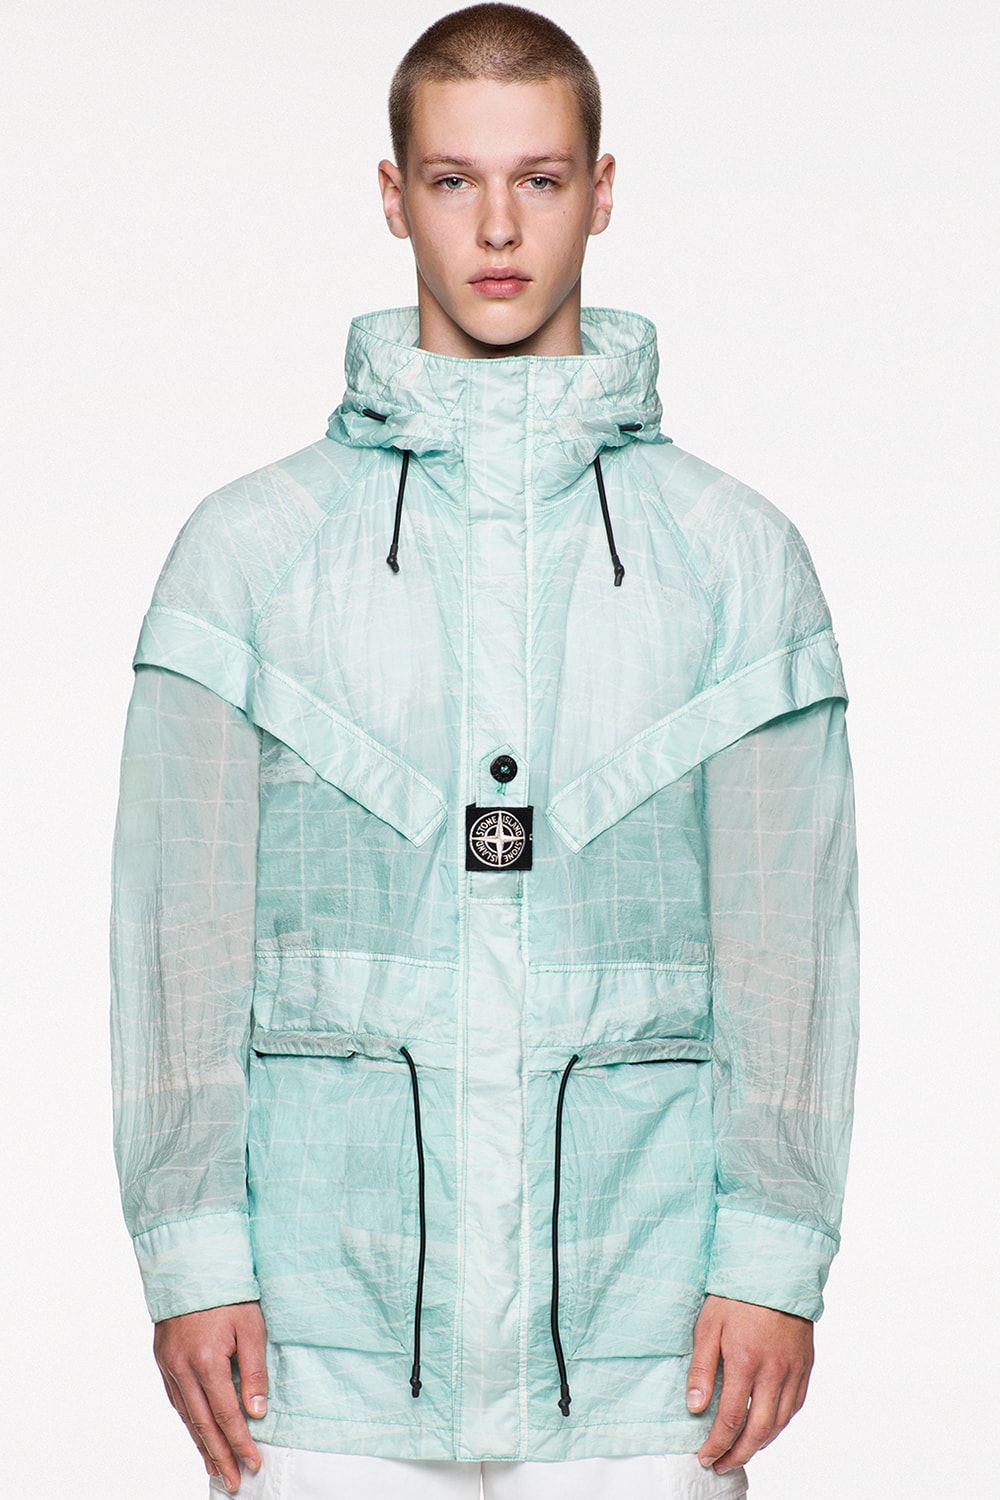 Moncler's Acquisition of Stone Island: A Force to be Reckoned With?